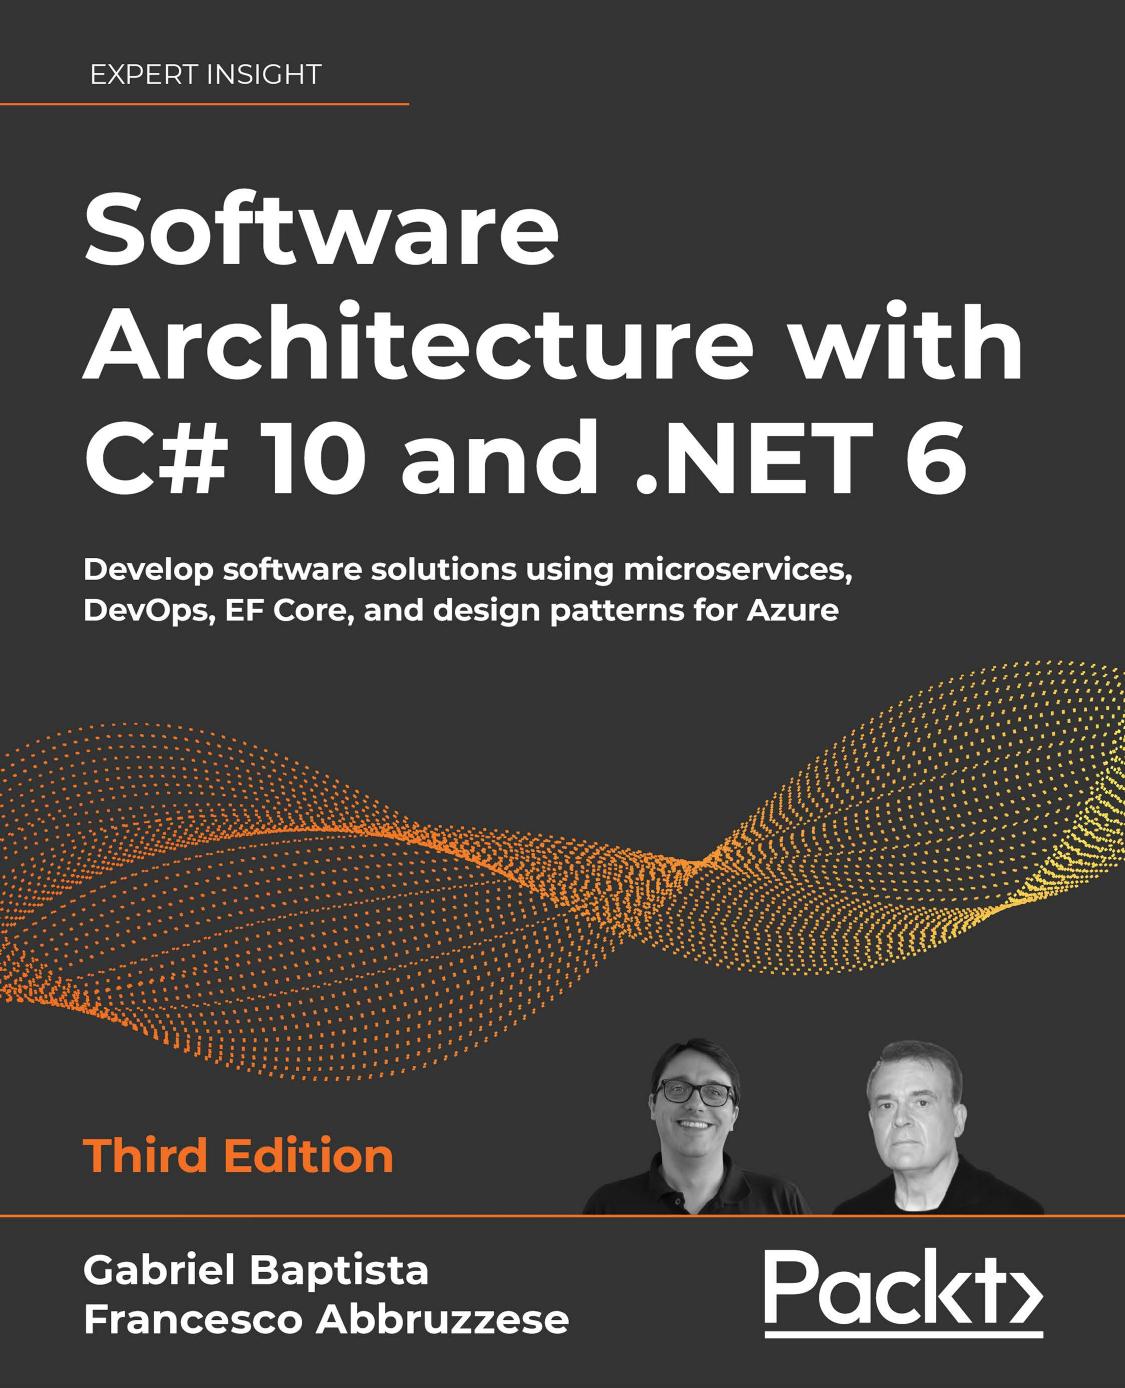 Software Architecture with C# 10 and .Net 6 - Third Edition: Develop Software Solutions Using Microservices, Devops, Ef Core, and Design Patterns For Azure